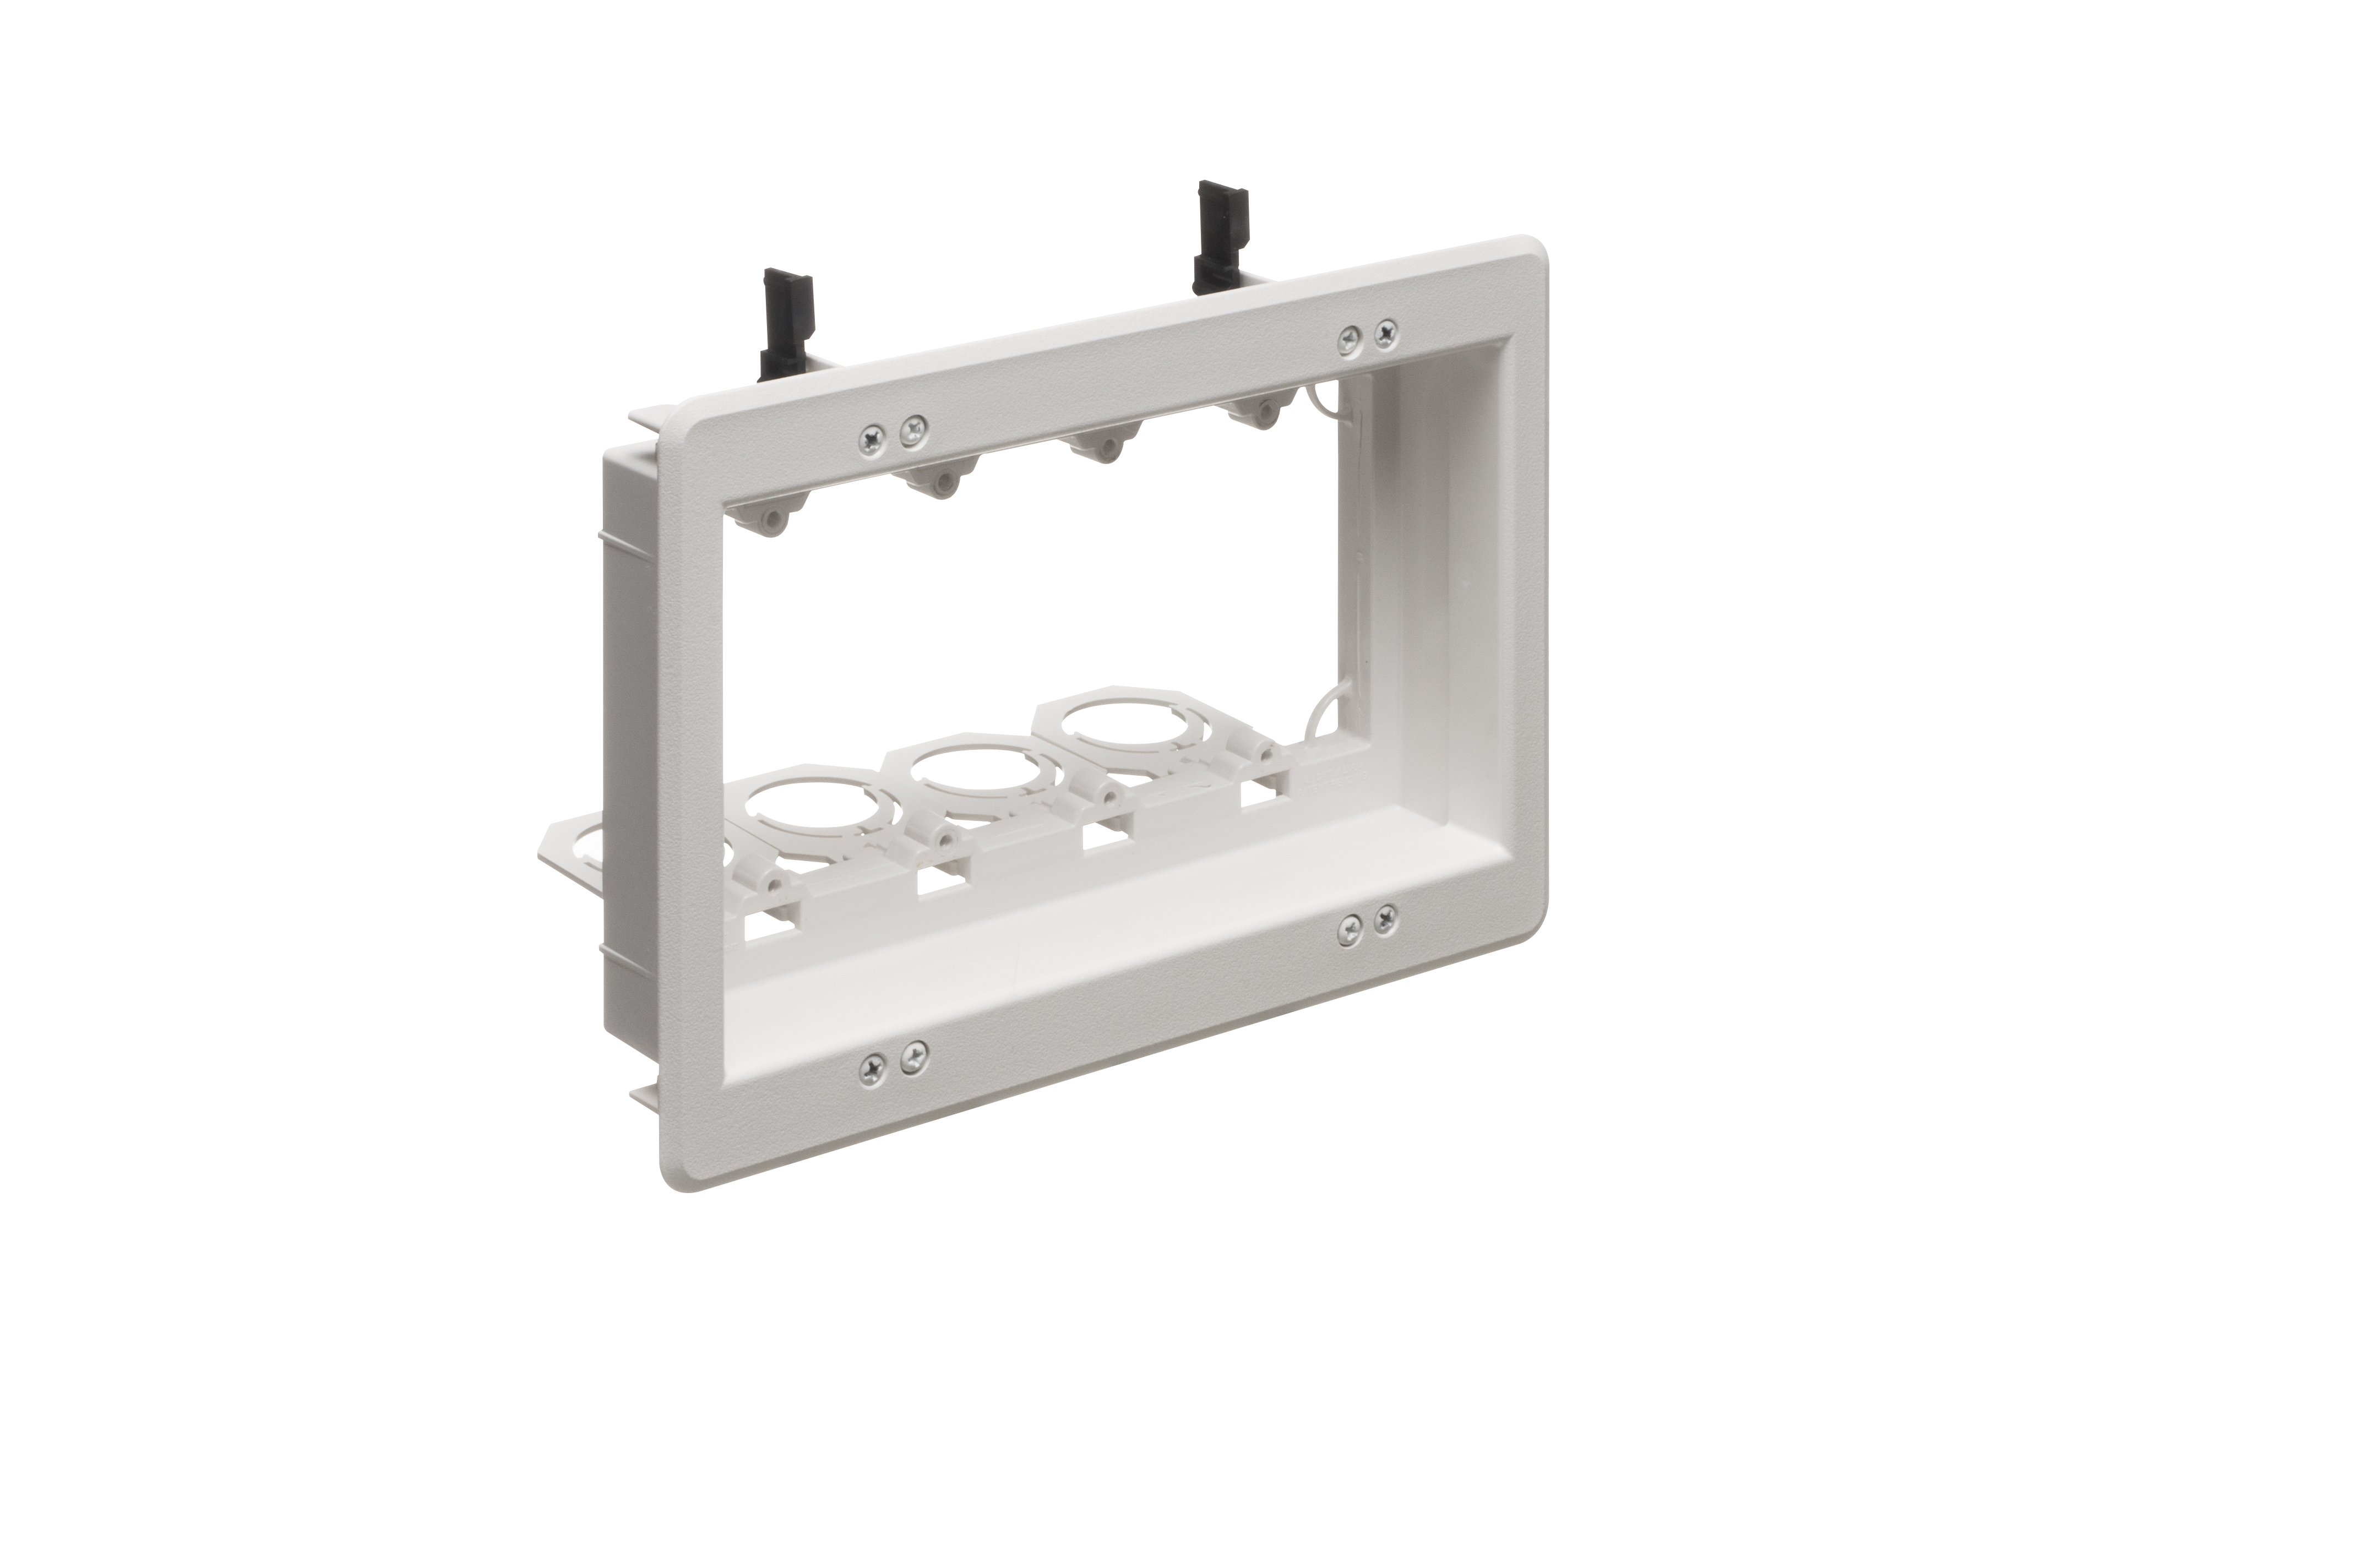 Recessed low voltage mounting bracket for old or new construction. Designed to install low voltage class 2 wiring only. White Paintable. Four Gang.